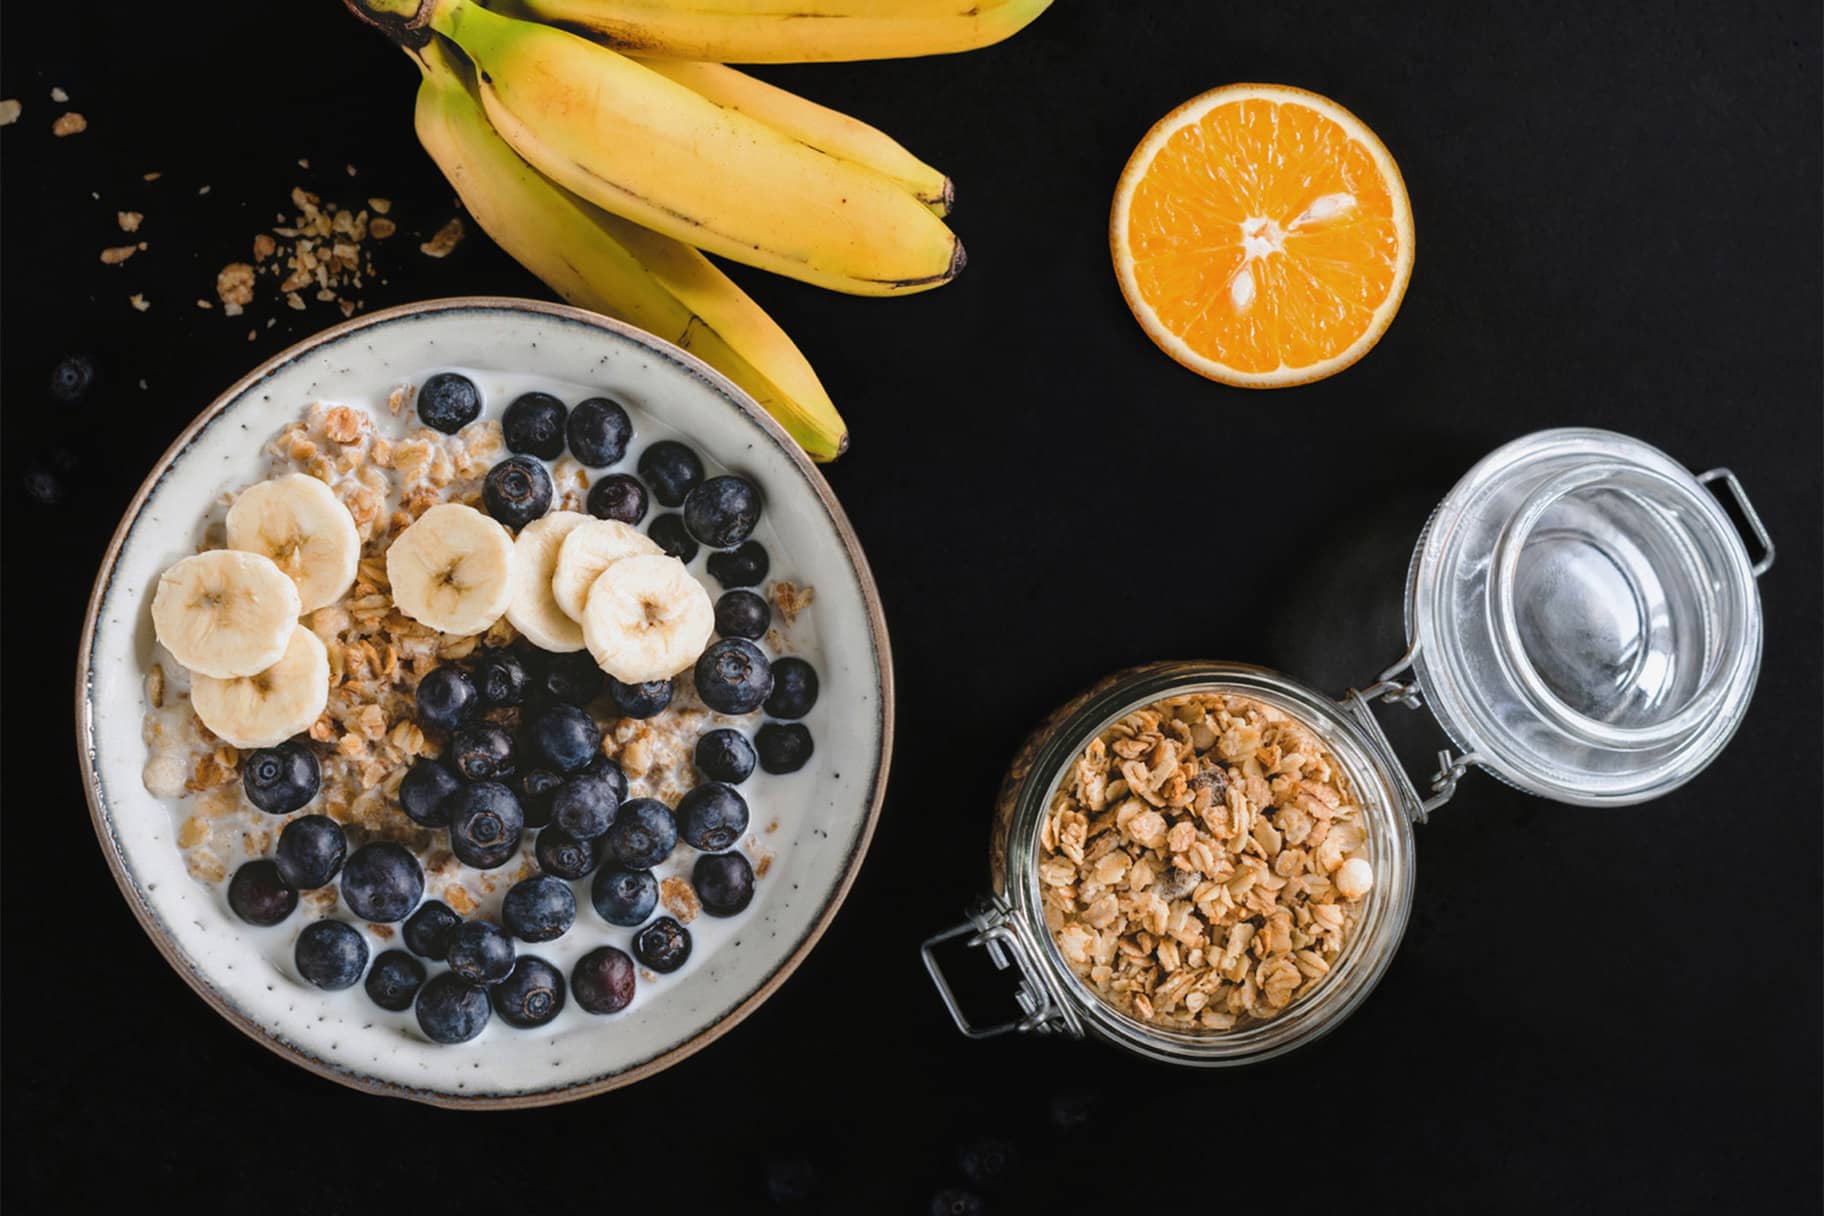 Should You Eat Breakfast Before or After a Workout?